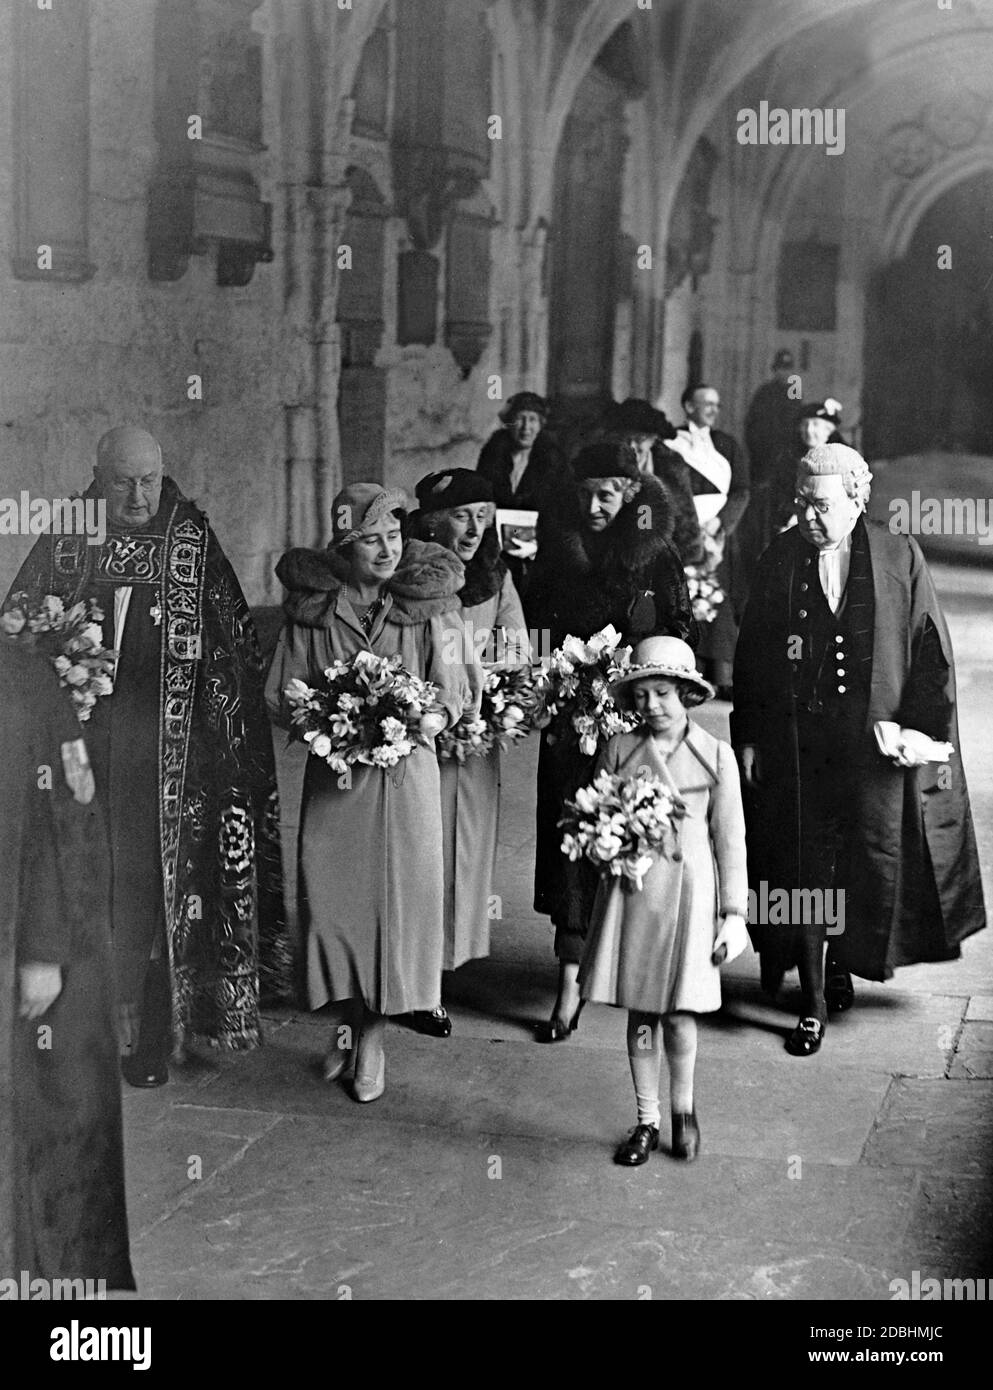 'From left to right: Queen Elizabeth, Princess Helena Victoria, Princess Marie Louise and Crown Princess Elizabeth after the ''Royal Maundy'' service at Westminster Abbey, one day before Good Friday.' Stock Photo